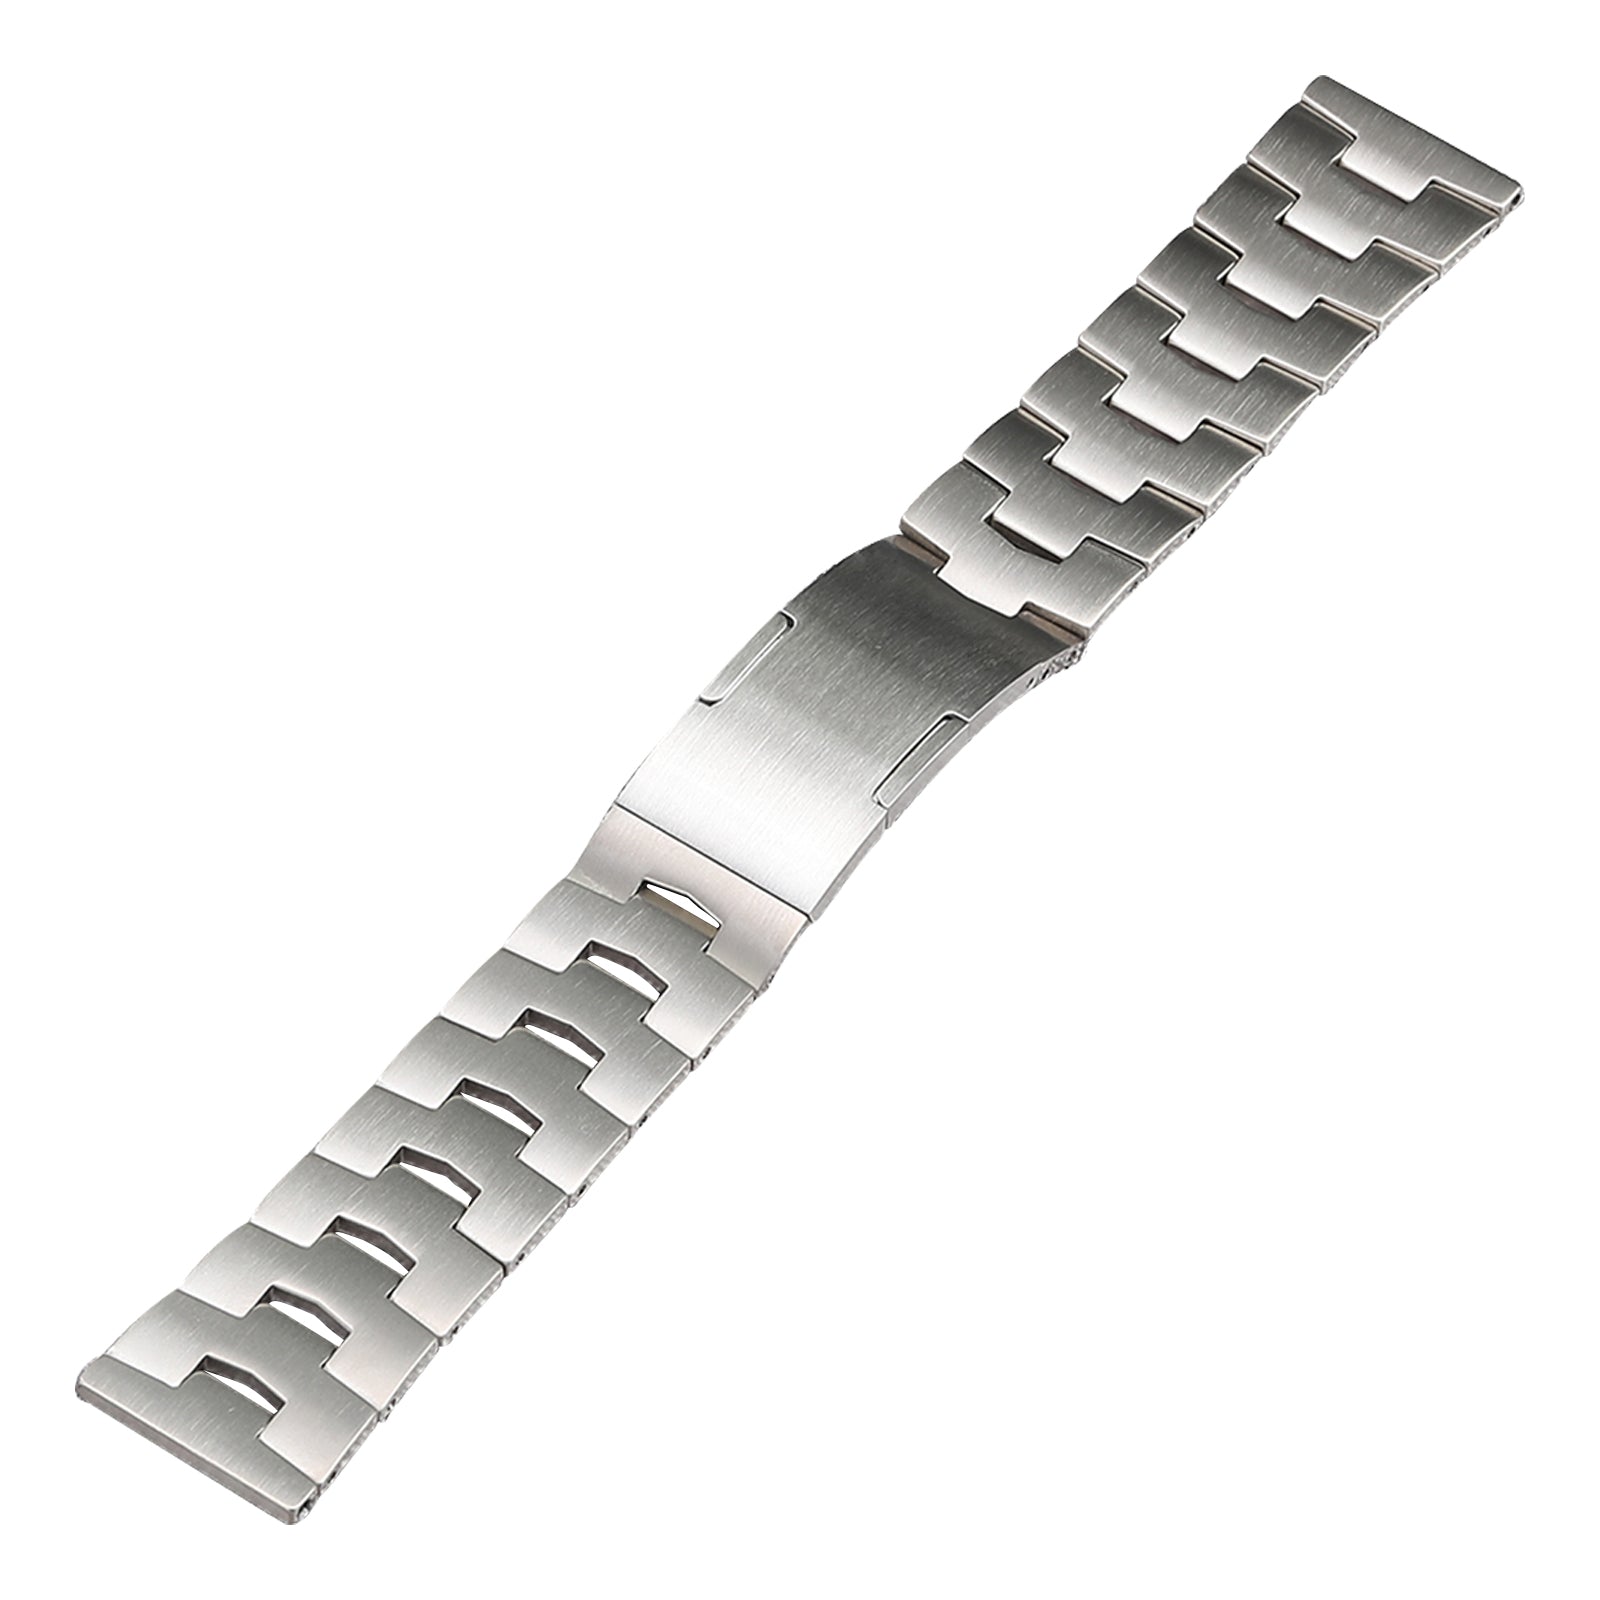 For Huawei Watch GT 3 SE / GT 2 Pro / Watch 3 Pro Titanium Steel Watch Strap 22mm Replacement Watch Band - Silver